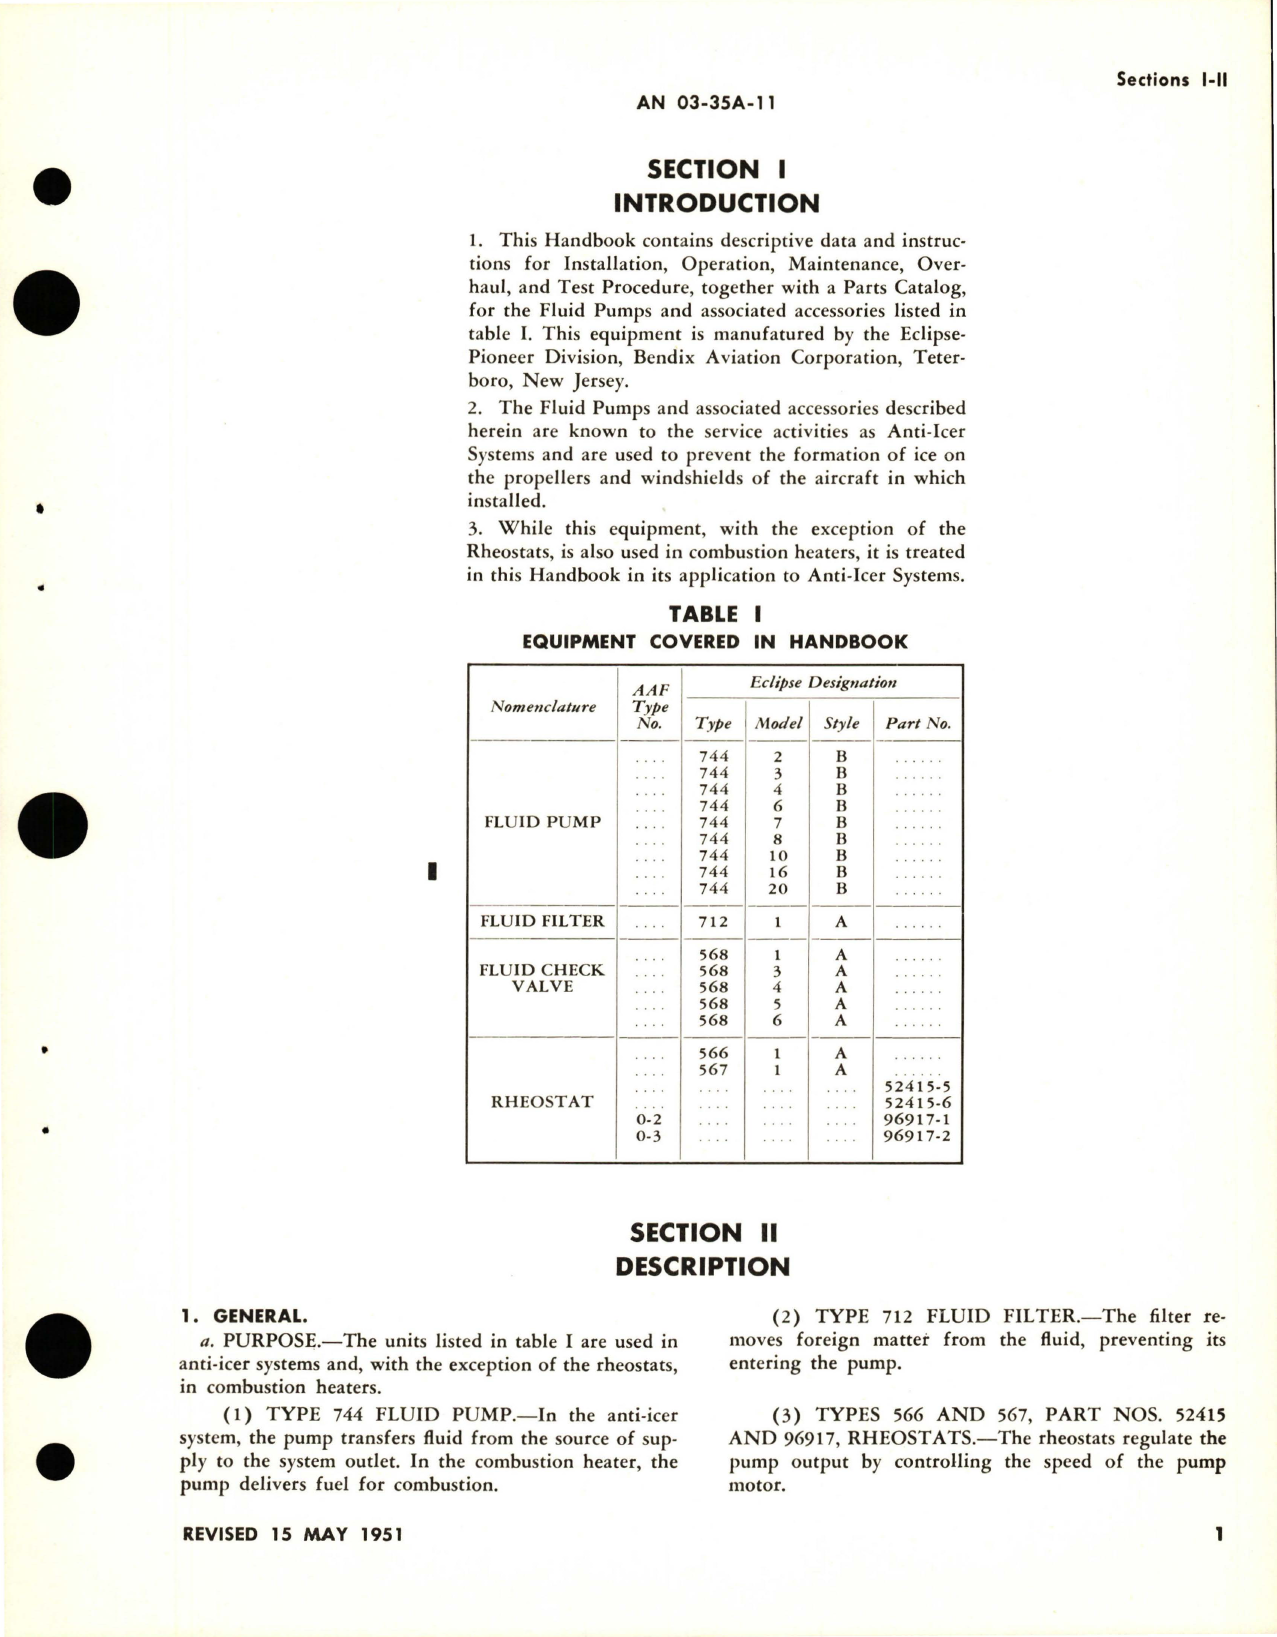 Sample page 7 from AirCorps Library document: Operation, Service and Overhaul Instructions with Parts Catalog for Propeller and Windshield Anti-Icer Pumps and Associated Accessories - Part 744 